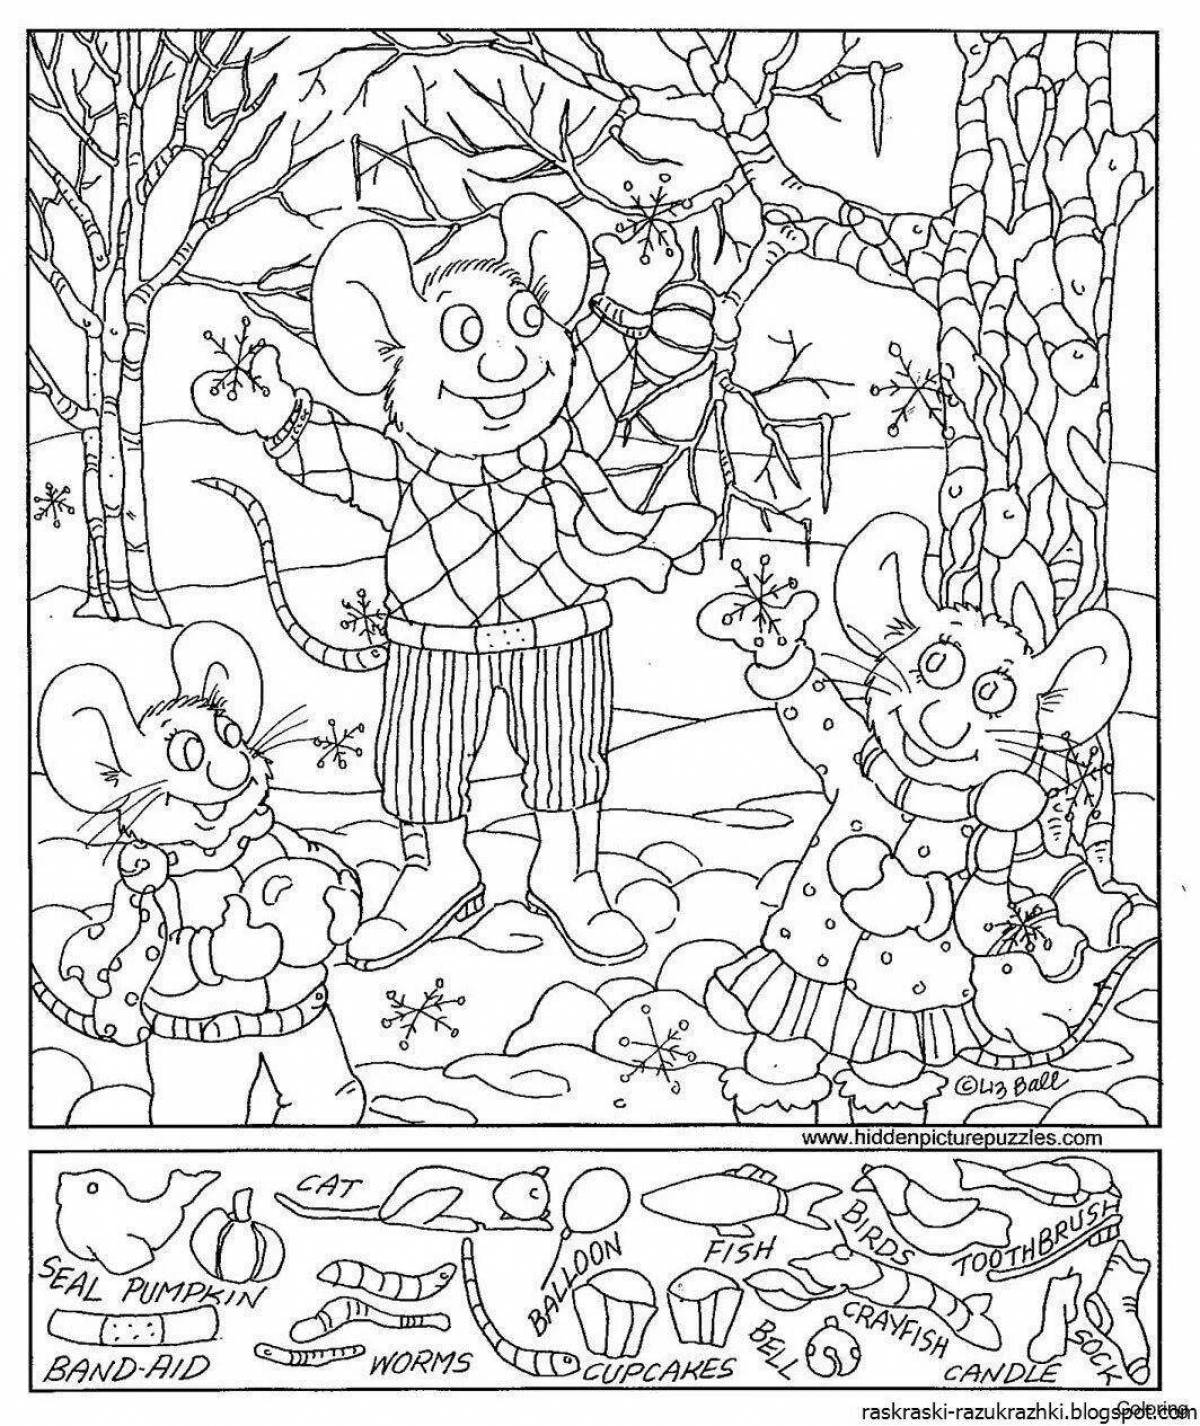 Great coloring book for mindfulness